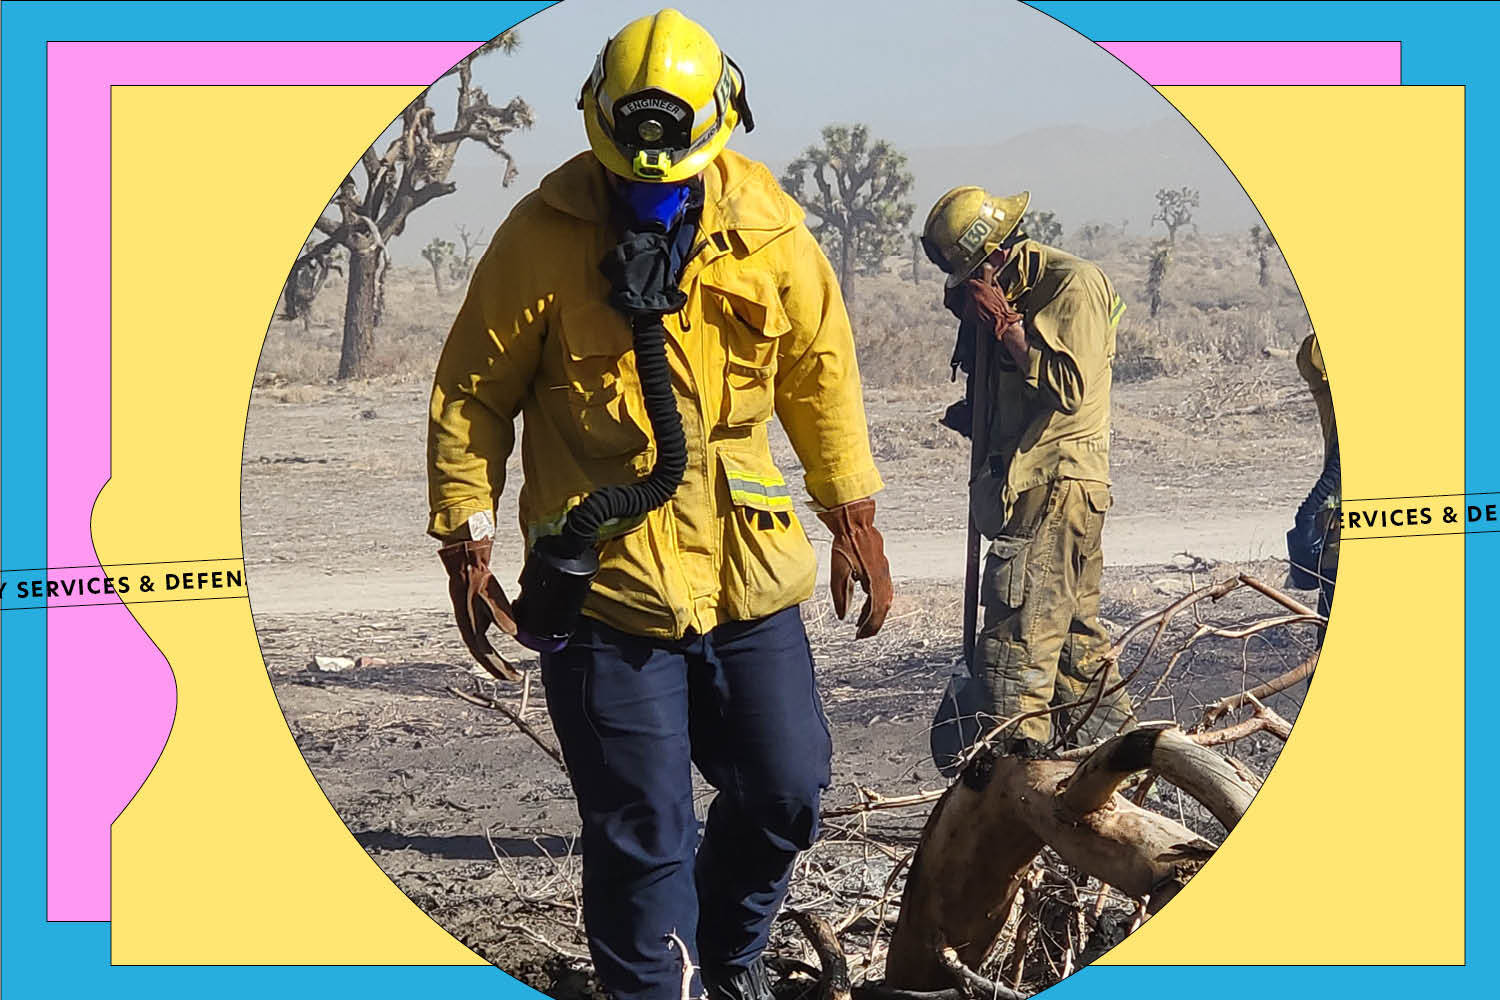 TDA respirator for firefighters fighting wildfires